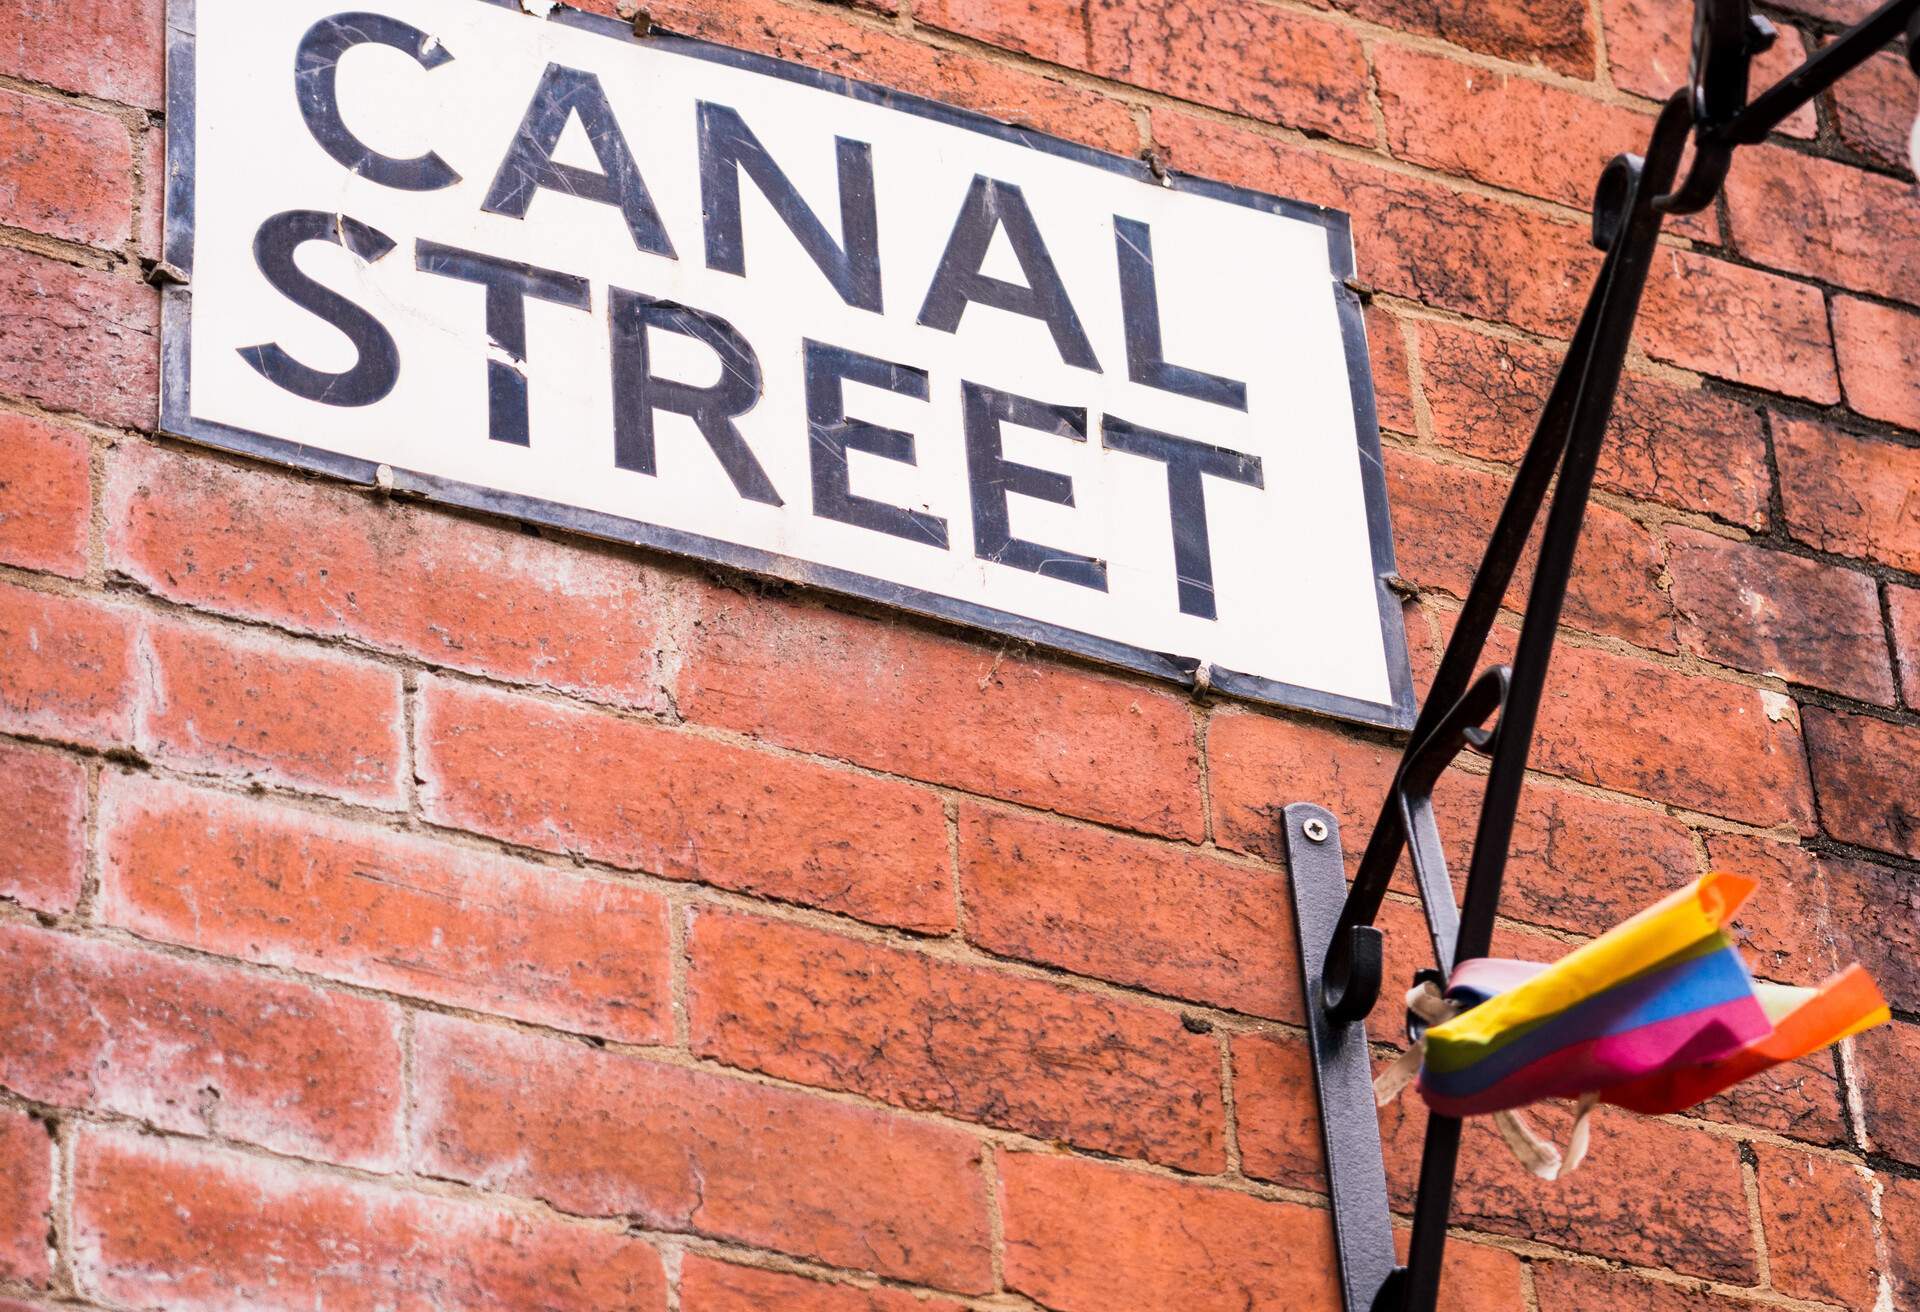 A sign for Canal Street in Manchester, well known as the centre of the city's historic Gay Village.